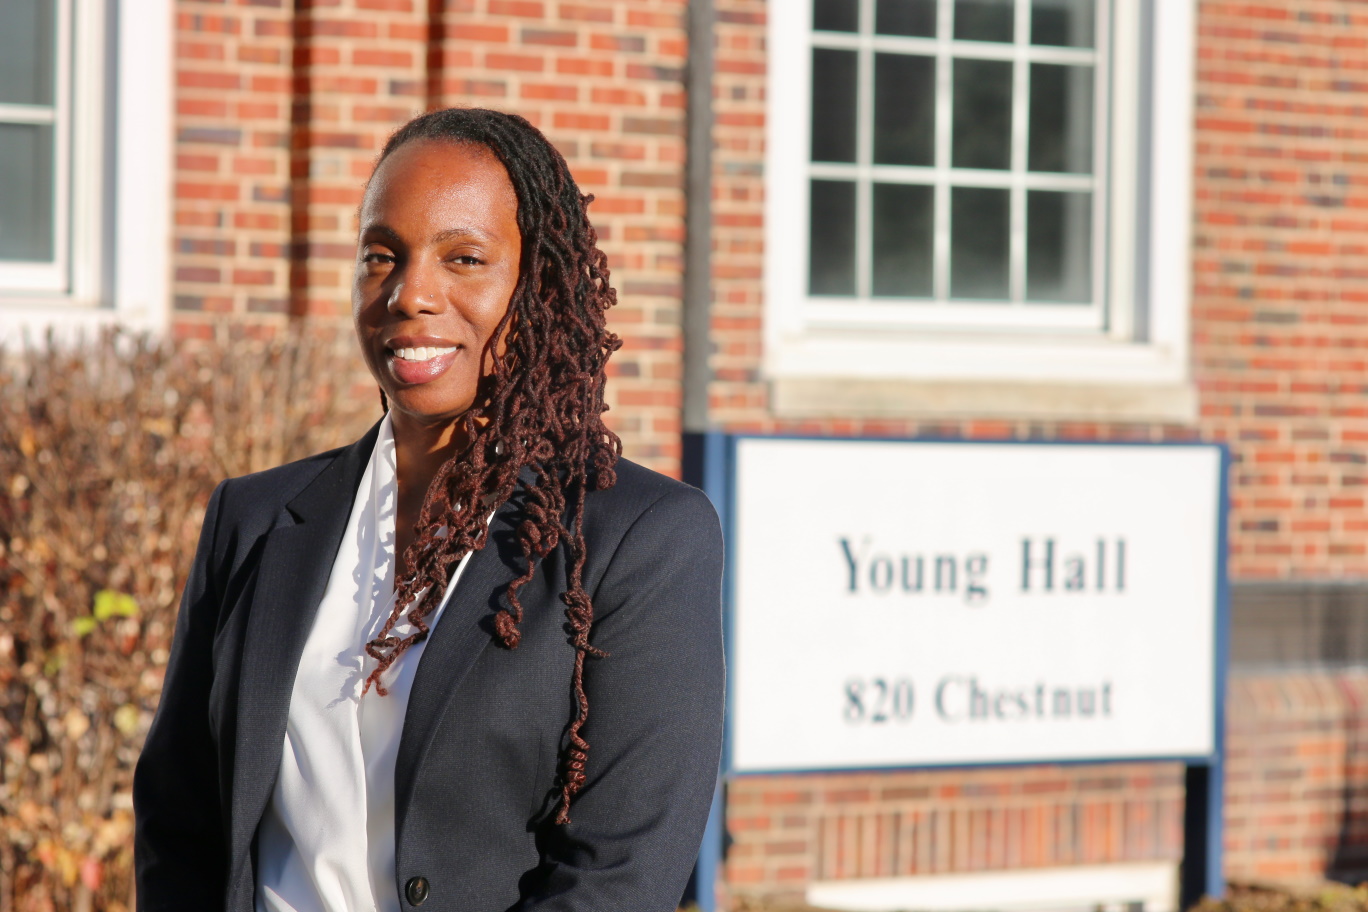 Dean of Students, Chief Diversity Officer and Chief Student Affairs Officer Zakiya Brown